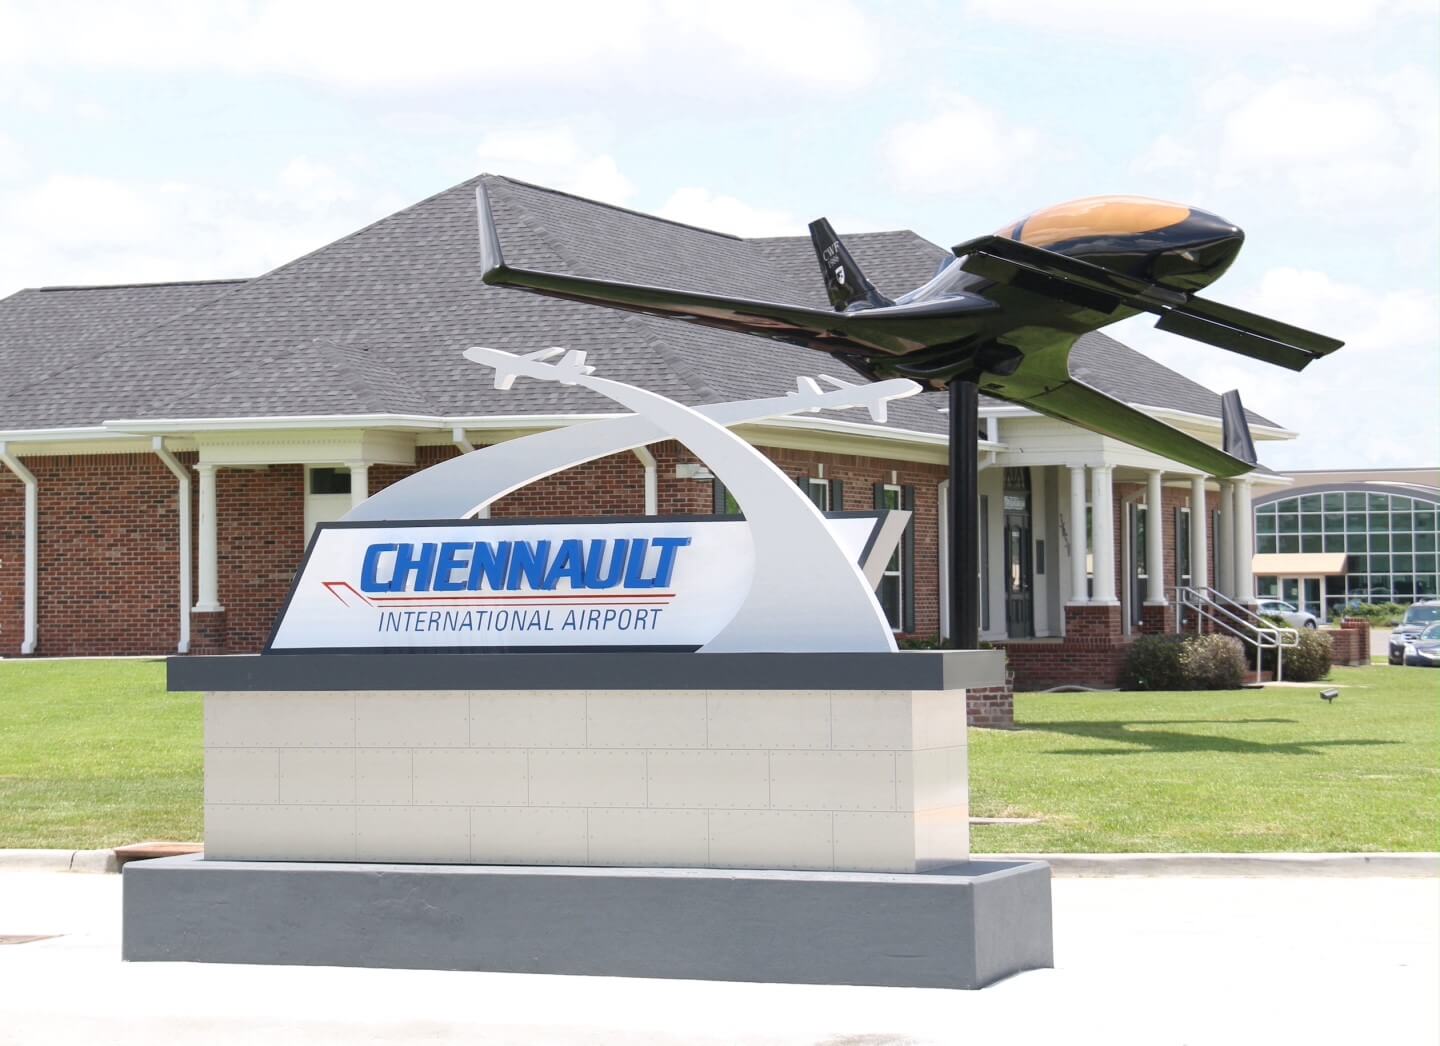 Chennault International Airport - request foreign clearance